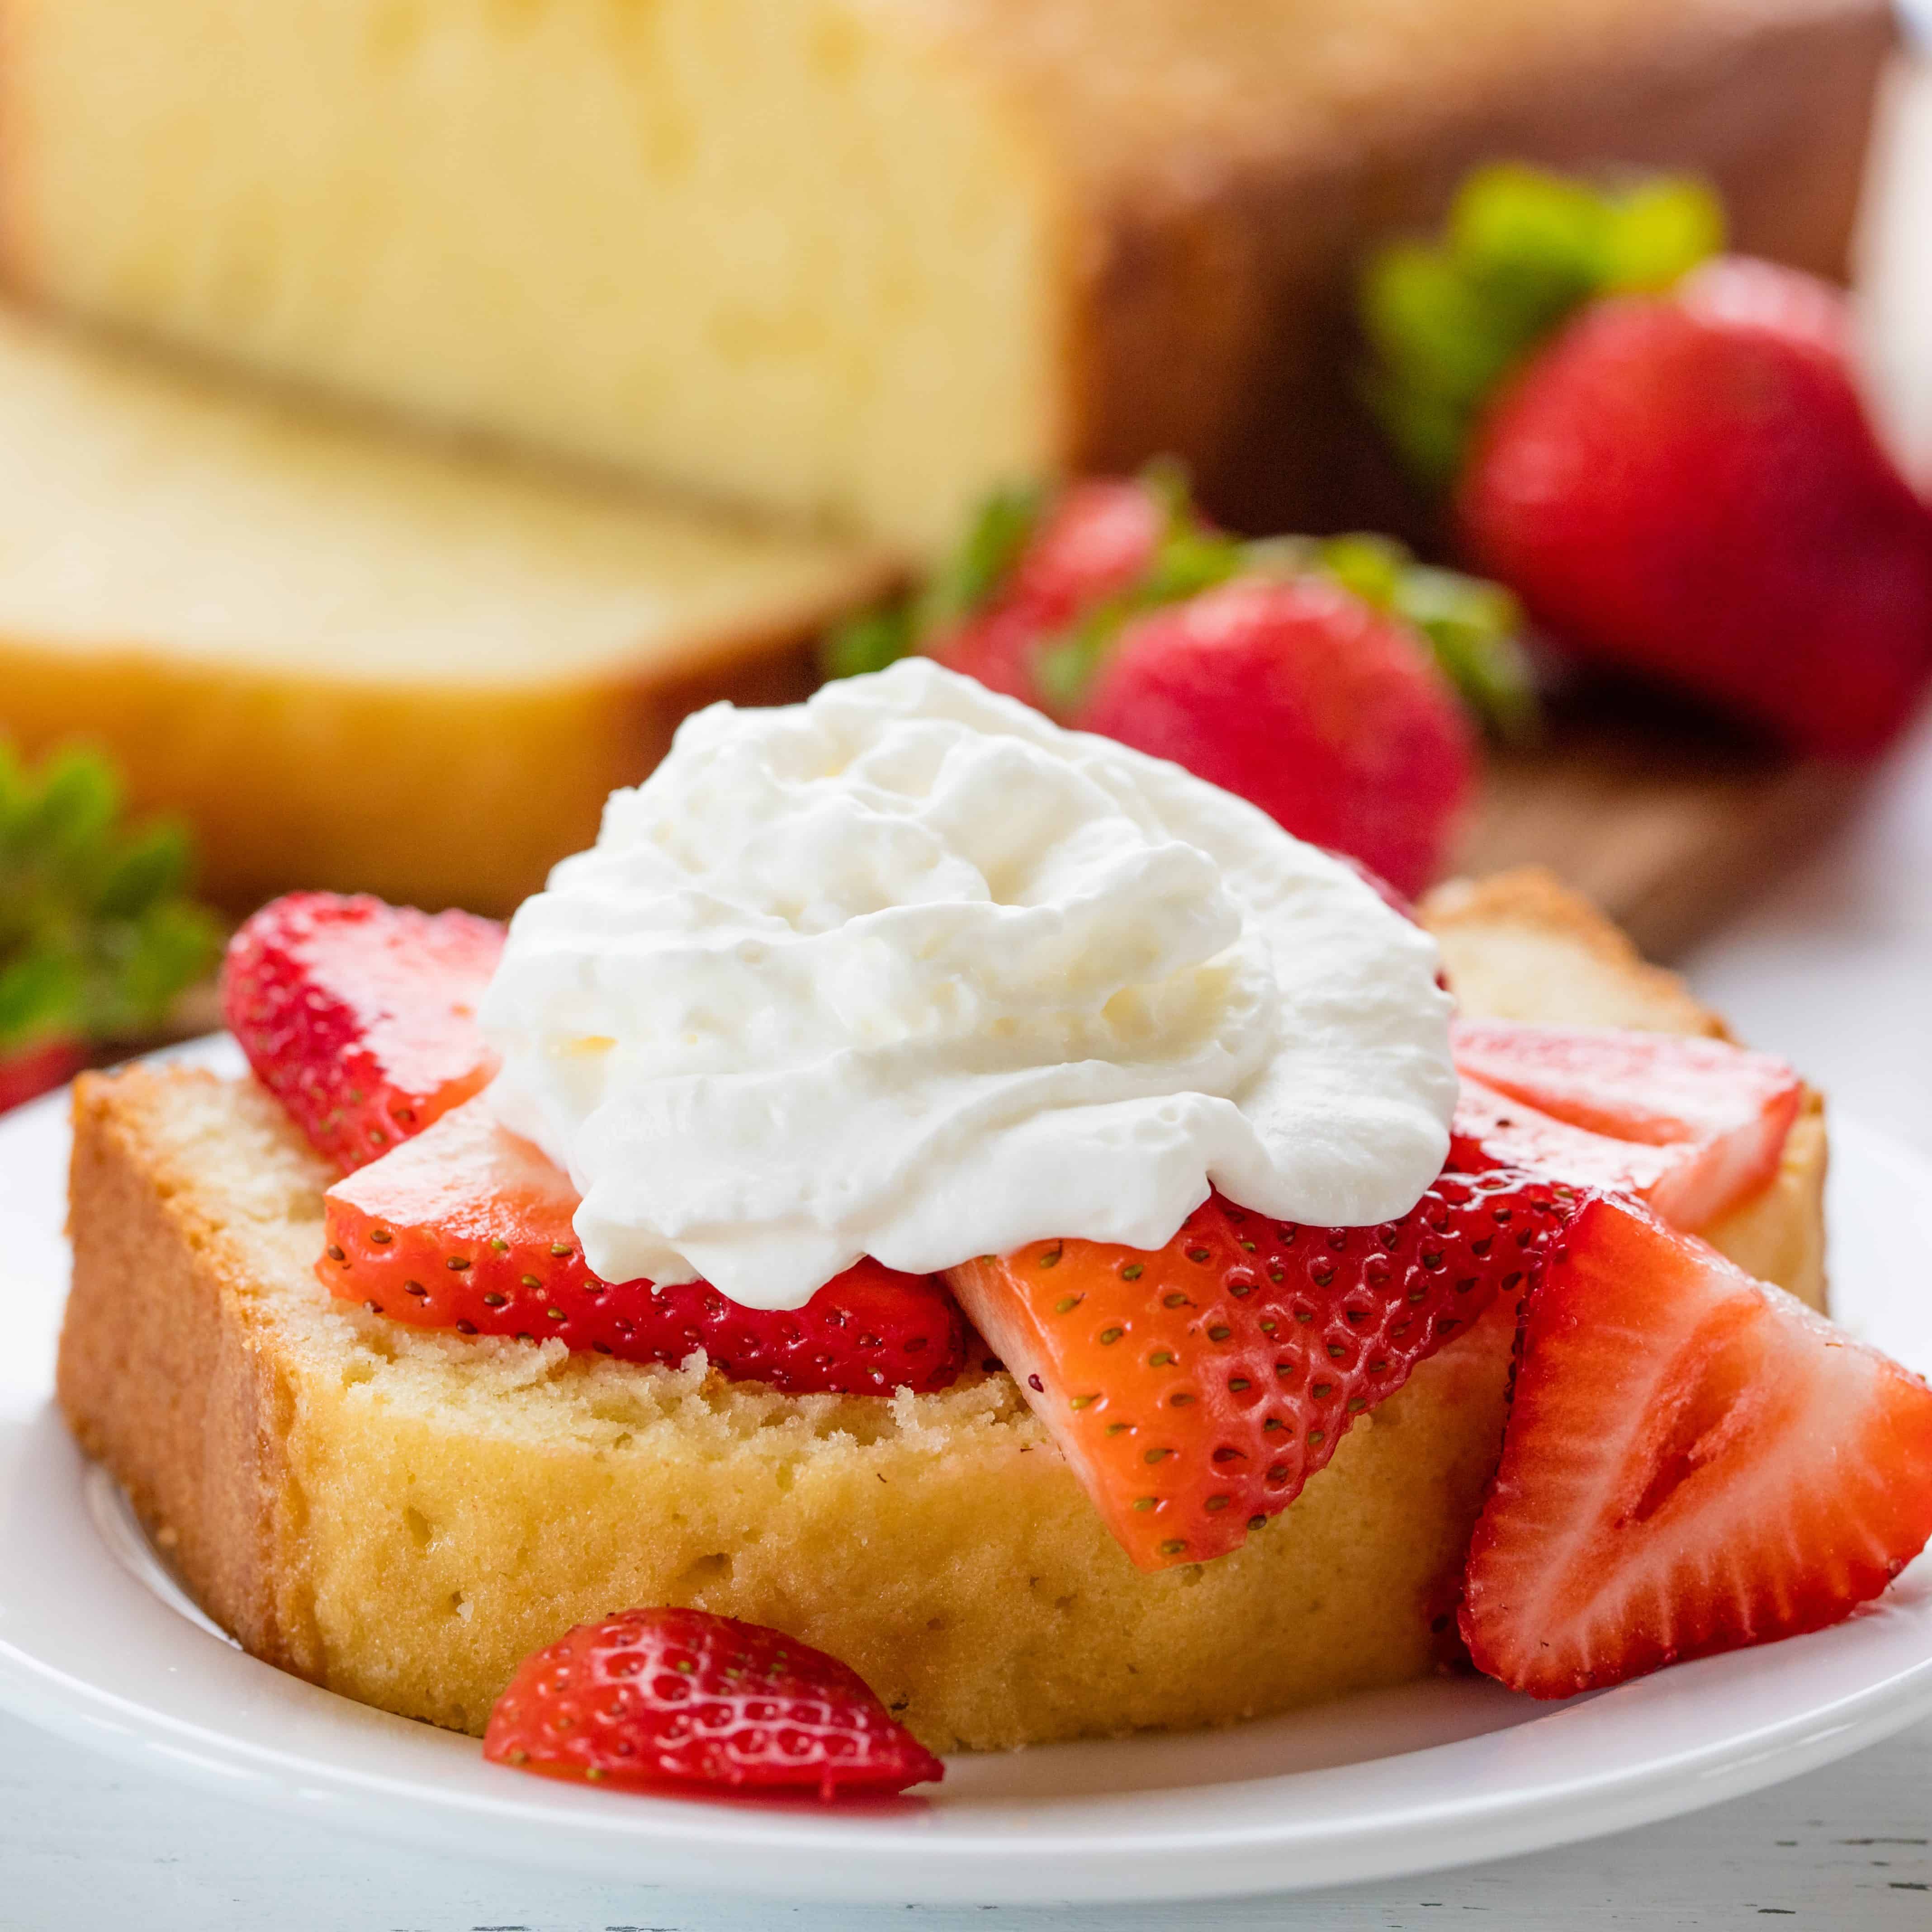 Slice of Pound Cake with sliced strawberries and whip cream on it.